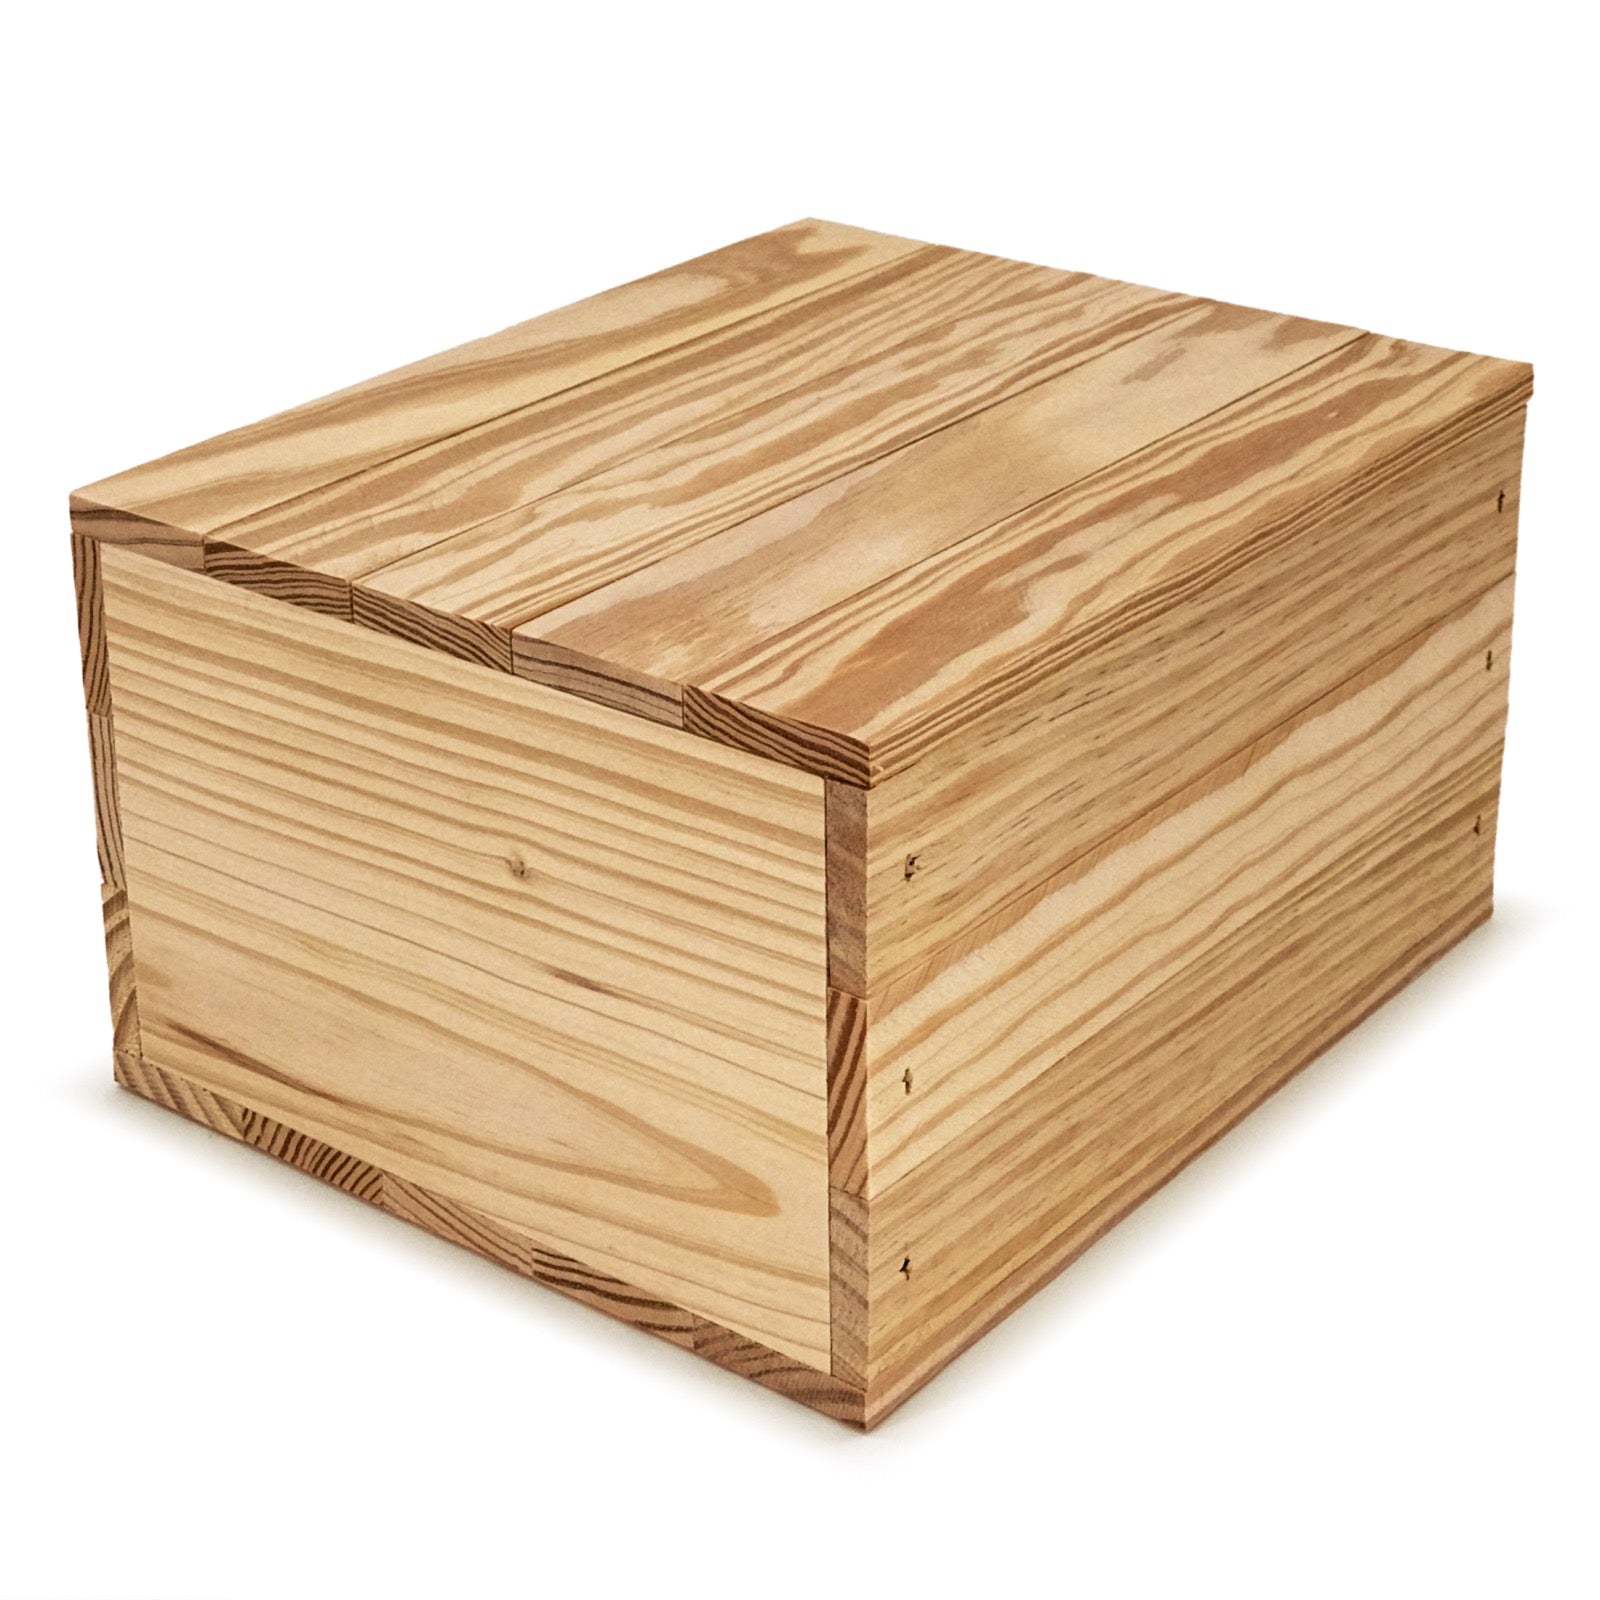 Small wooden crate with lid 9x8x5.25